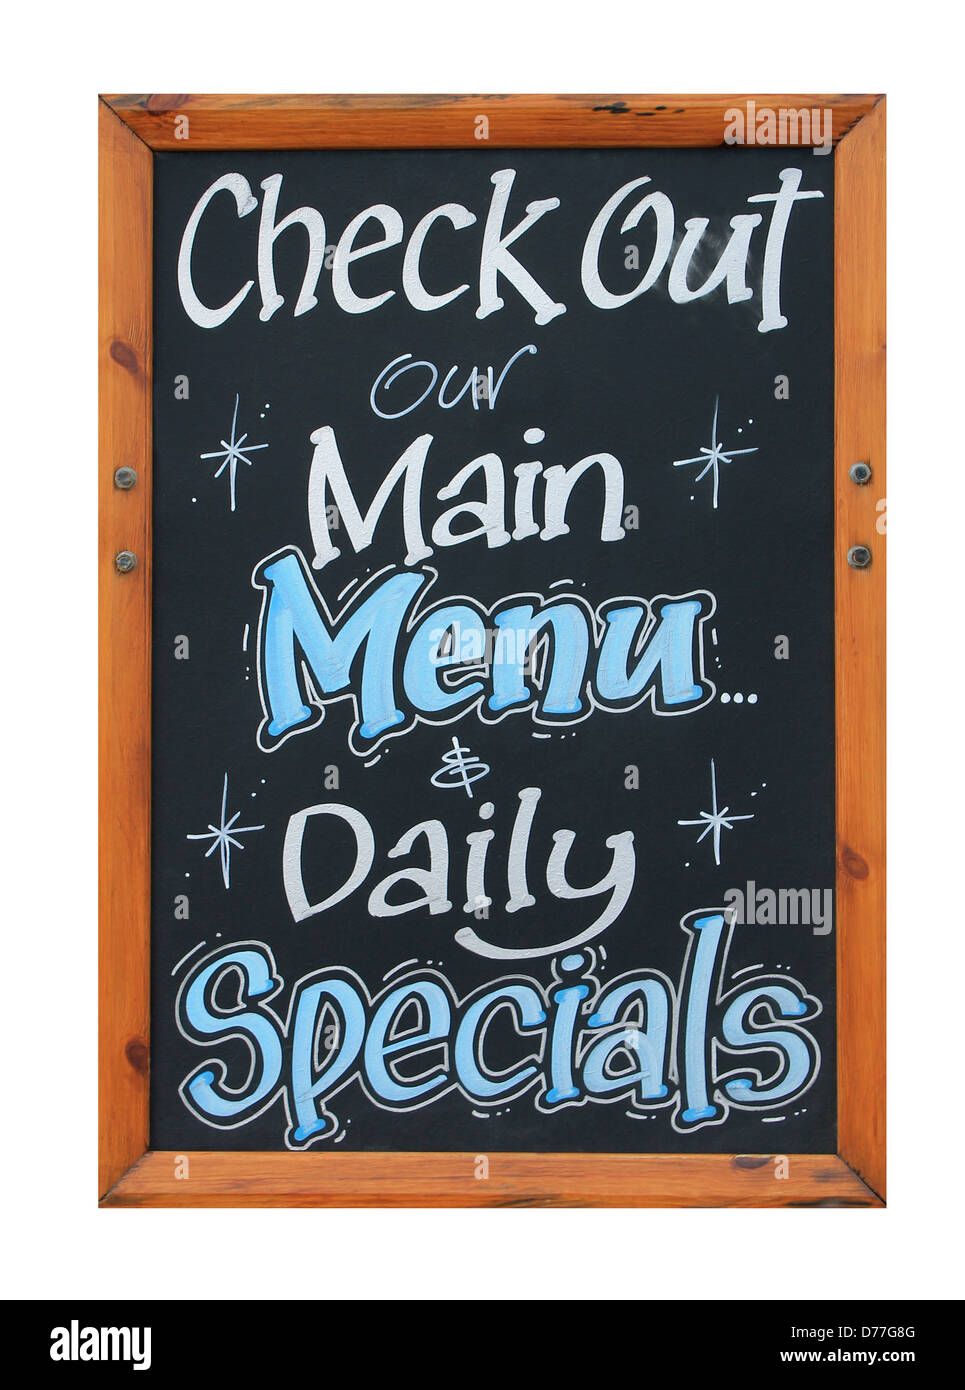 Cafe advertisement sign saying check out our main menu and daily specials, white background. Stock Photo